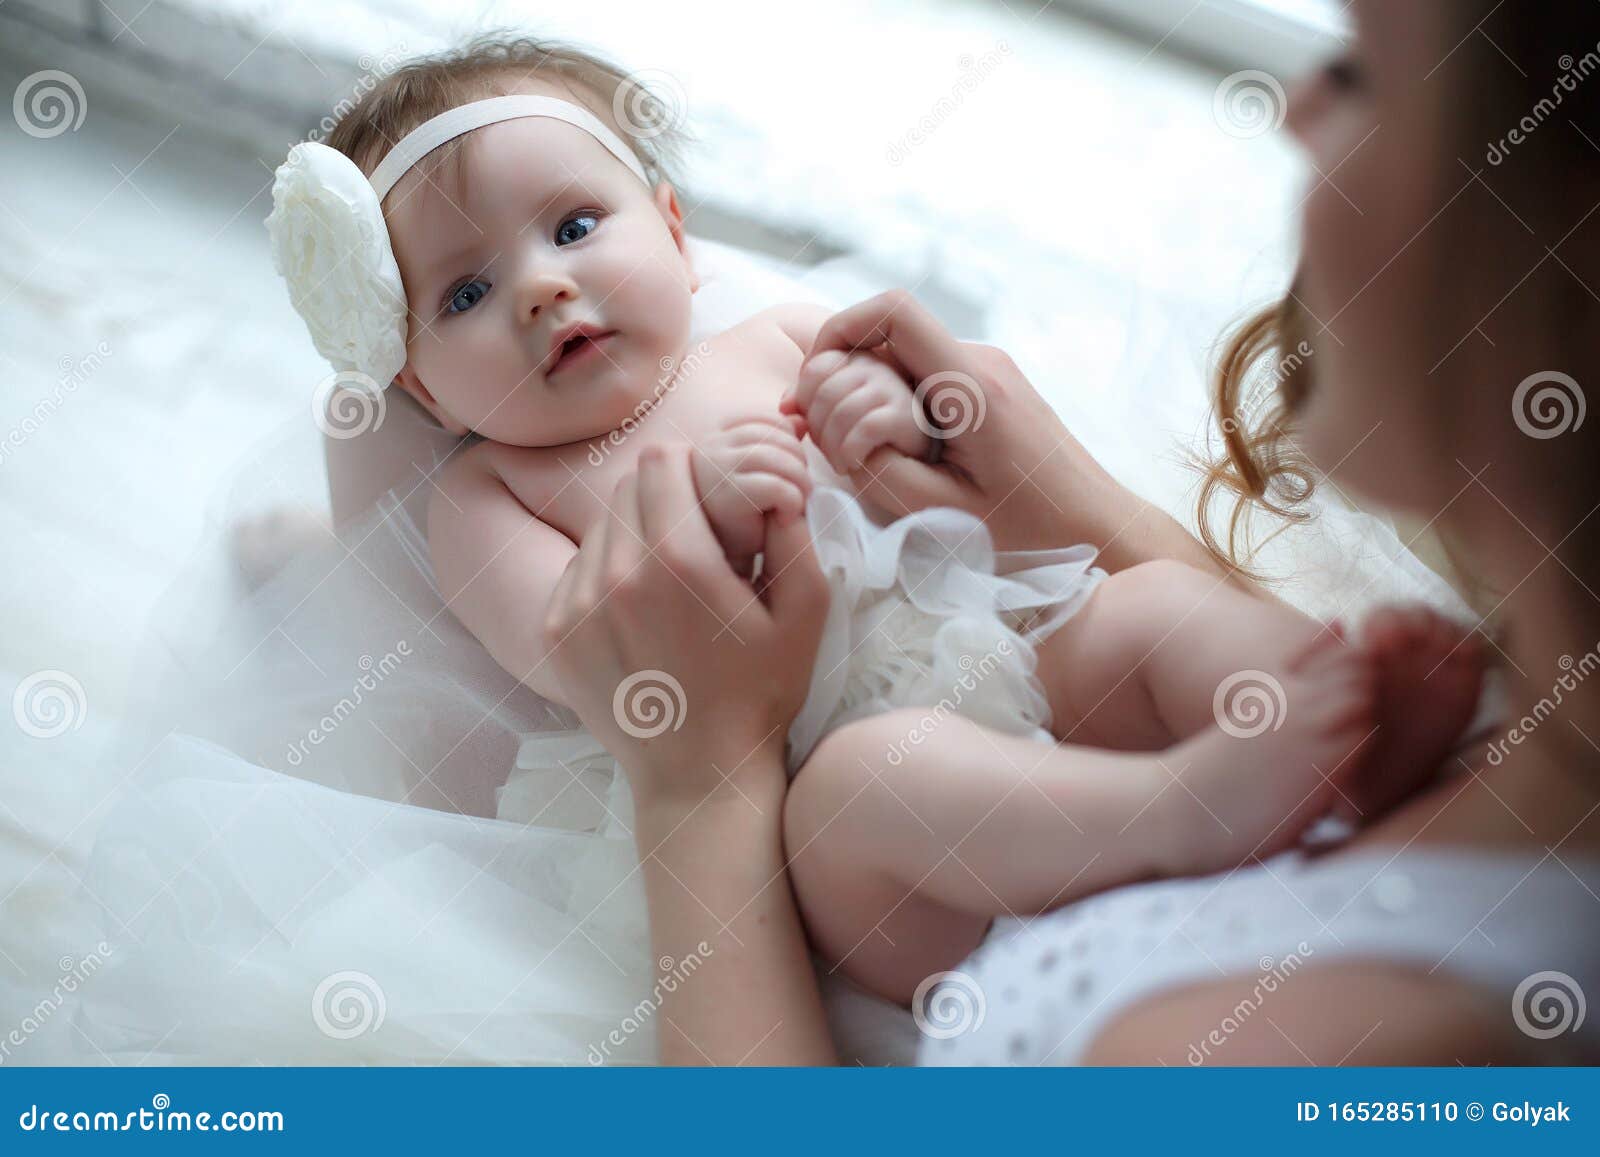 small hands of a newborn baby in the tender palms of a caring mother